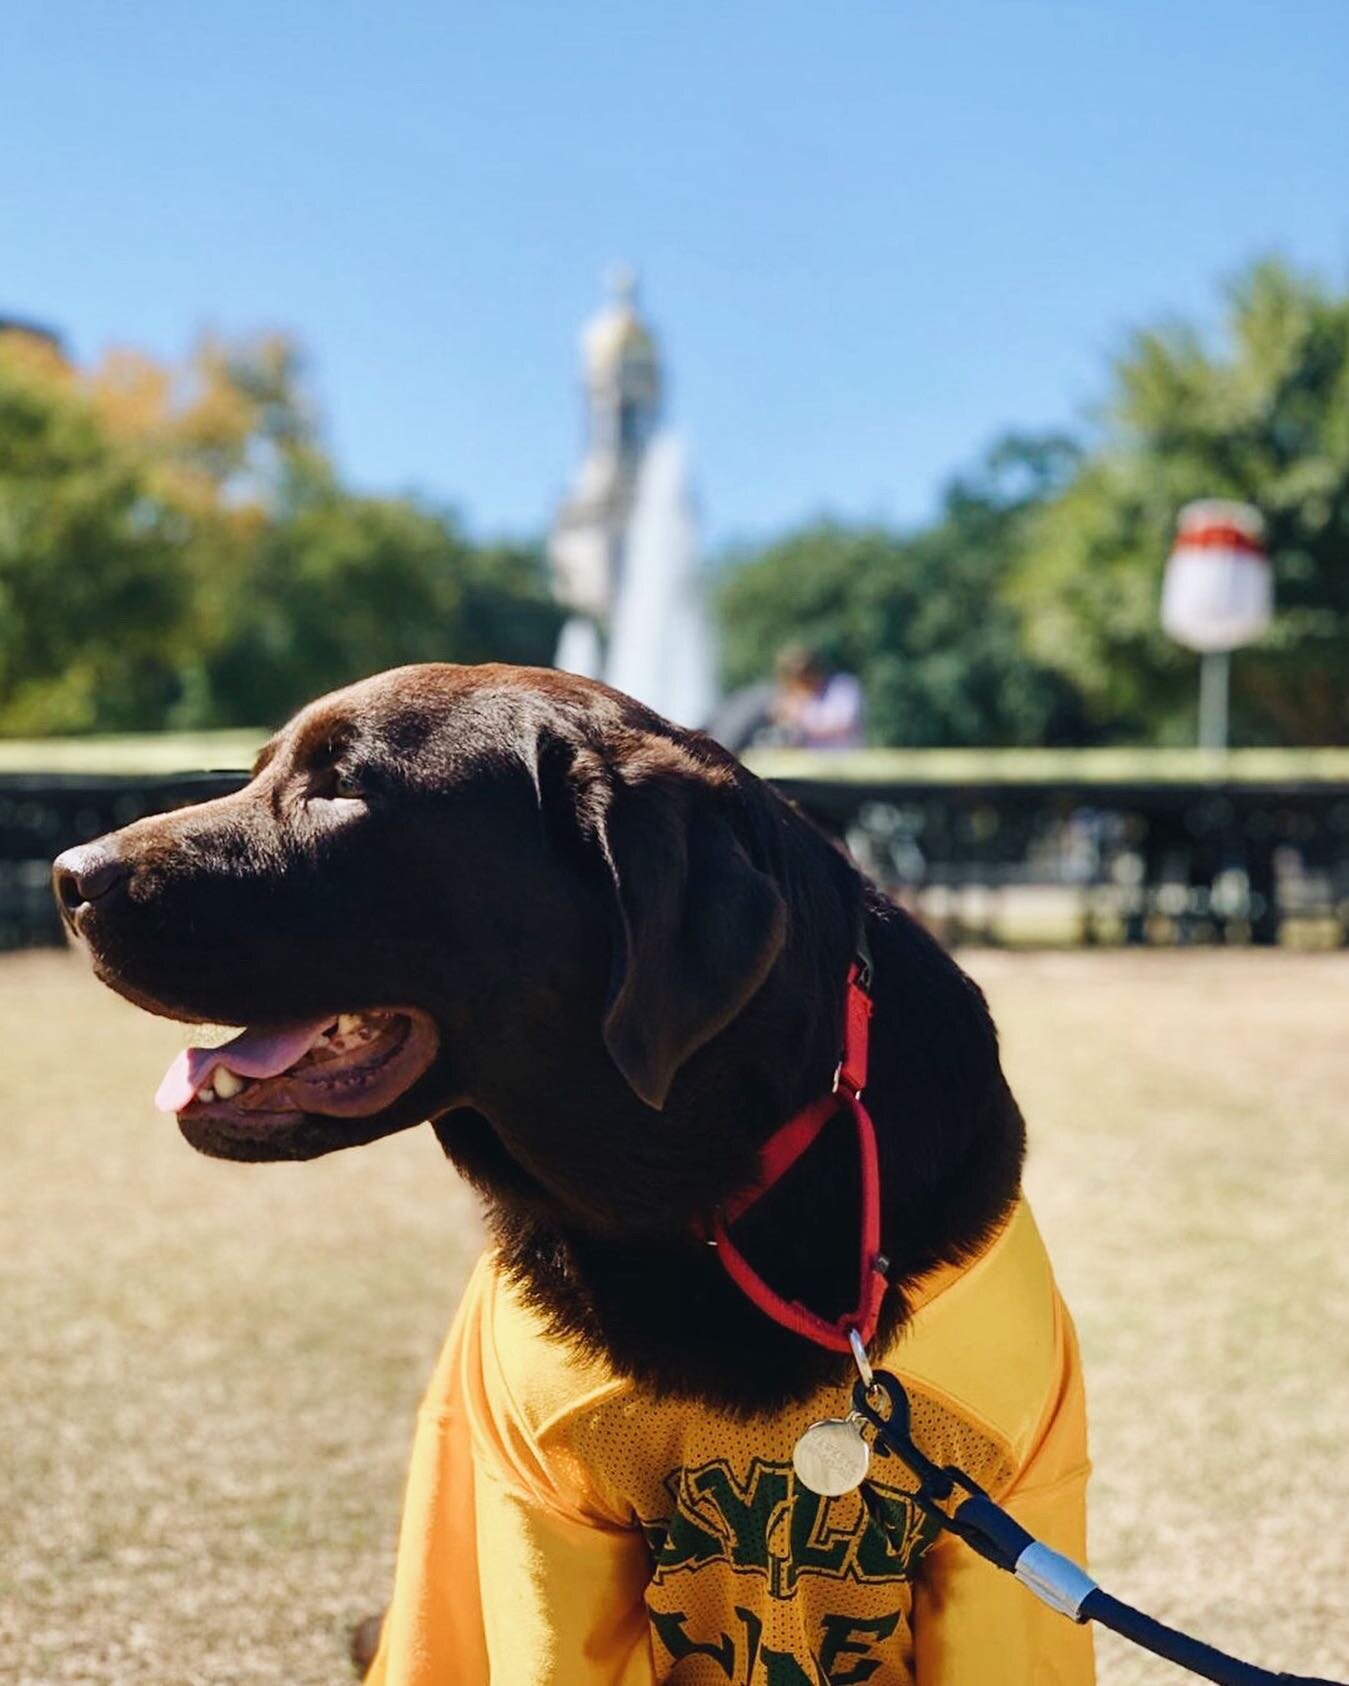 A friendly doggo reminder of what color to wear today 💛 Let's go sic some Cyclones, y'all [📸: @sarah_bivens]